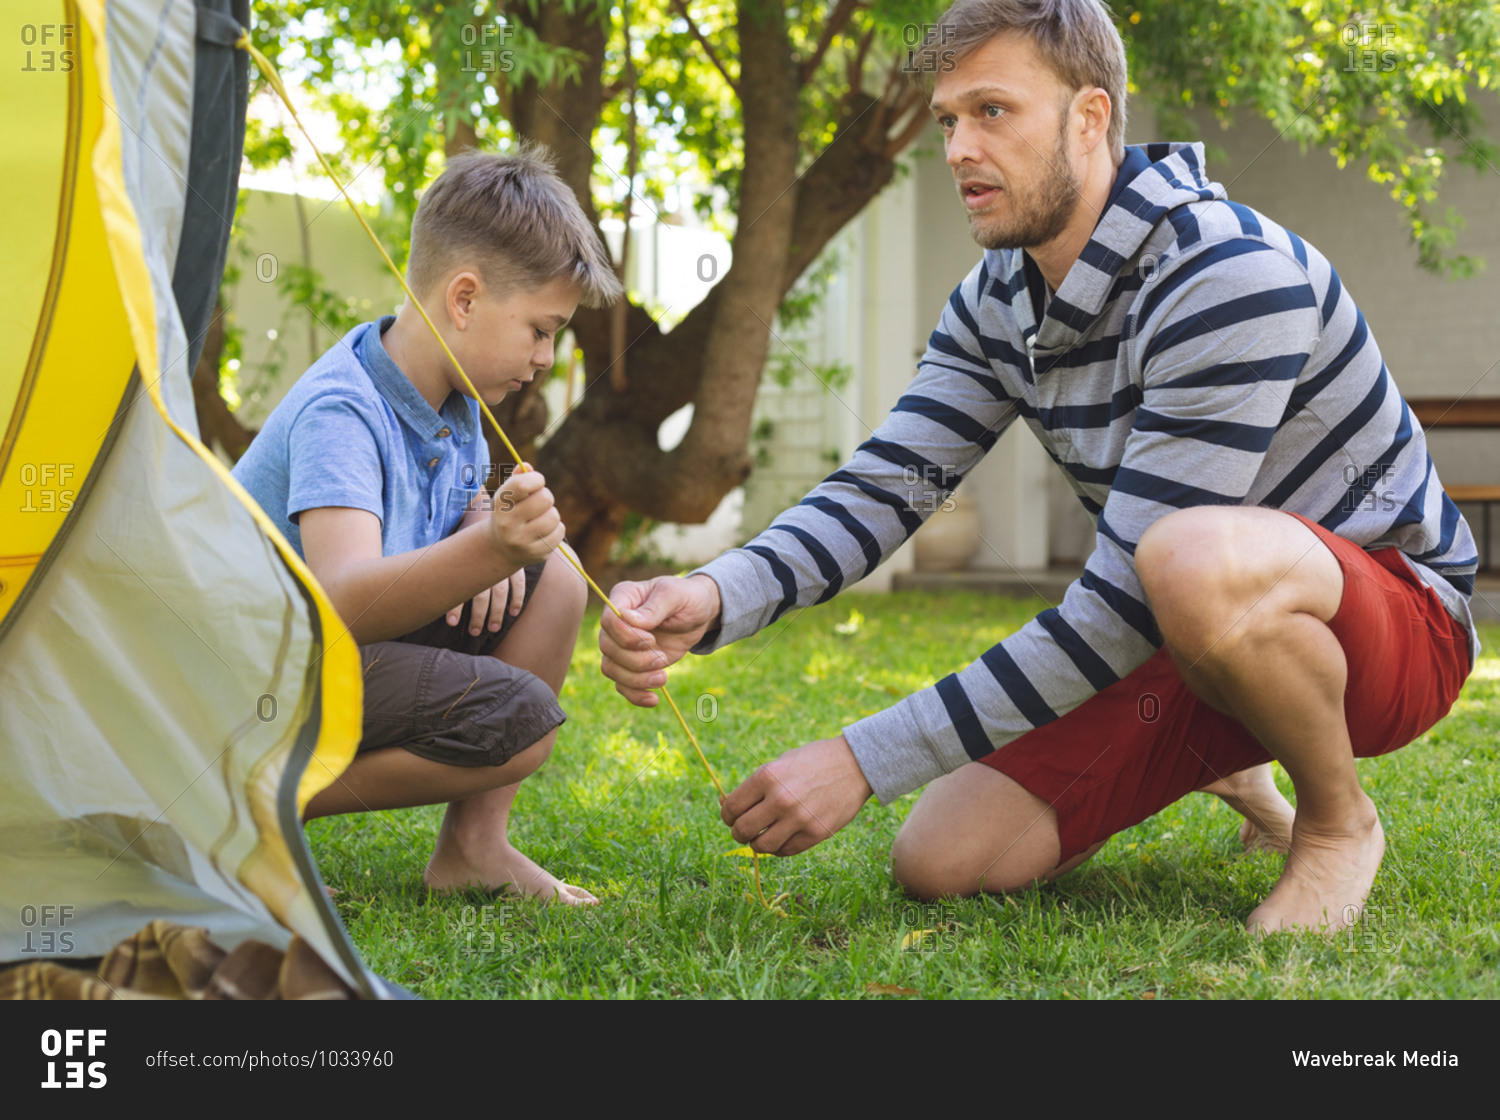 Caucasian man spending time with his son together, camping in garden, putting tent up. Social distancing during Covid 19 Coronavirus quarantine lockdown.